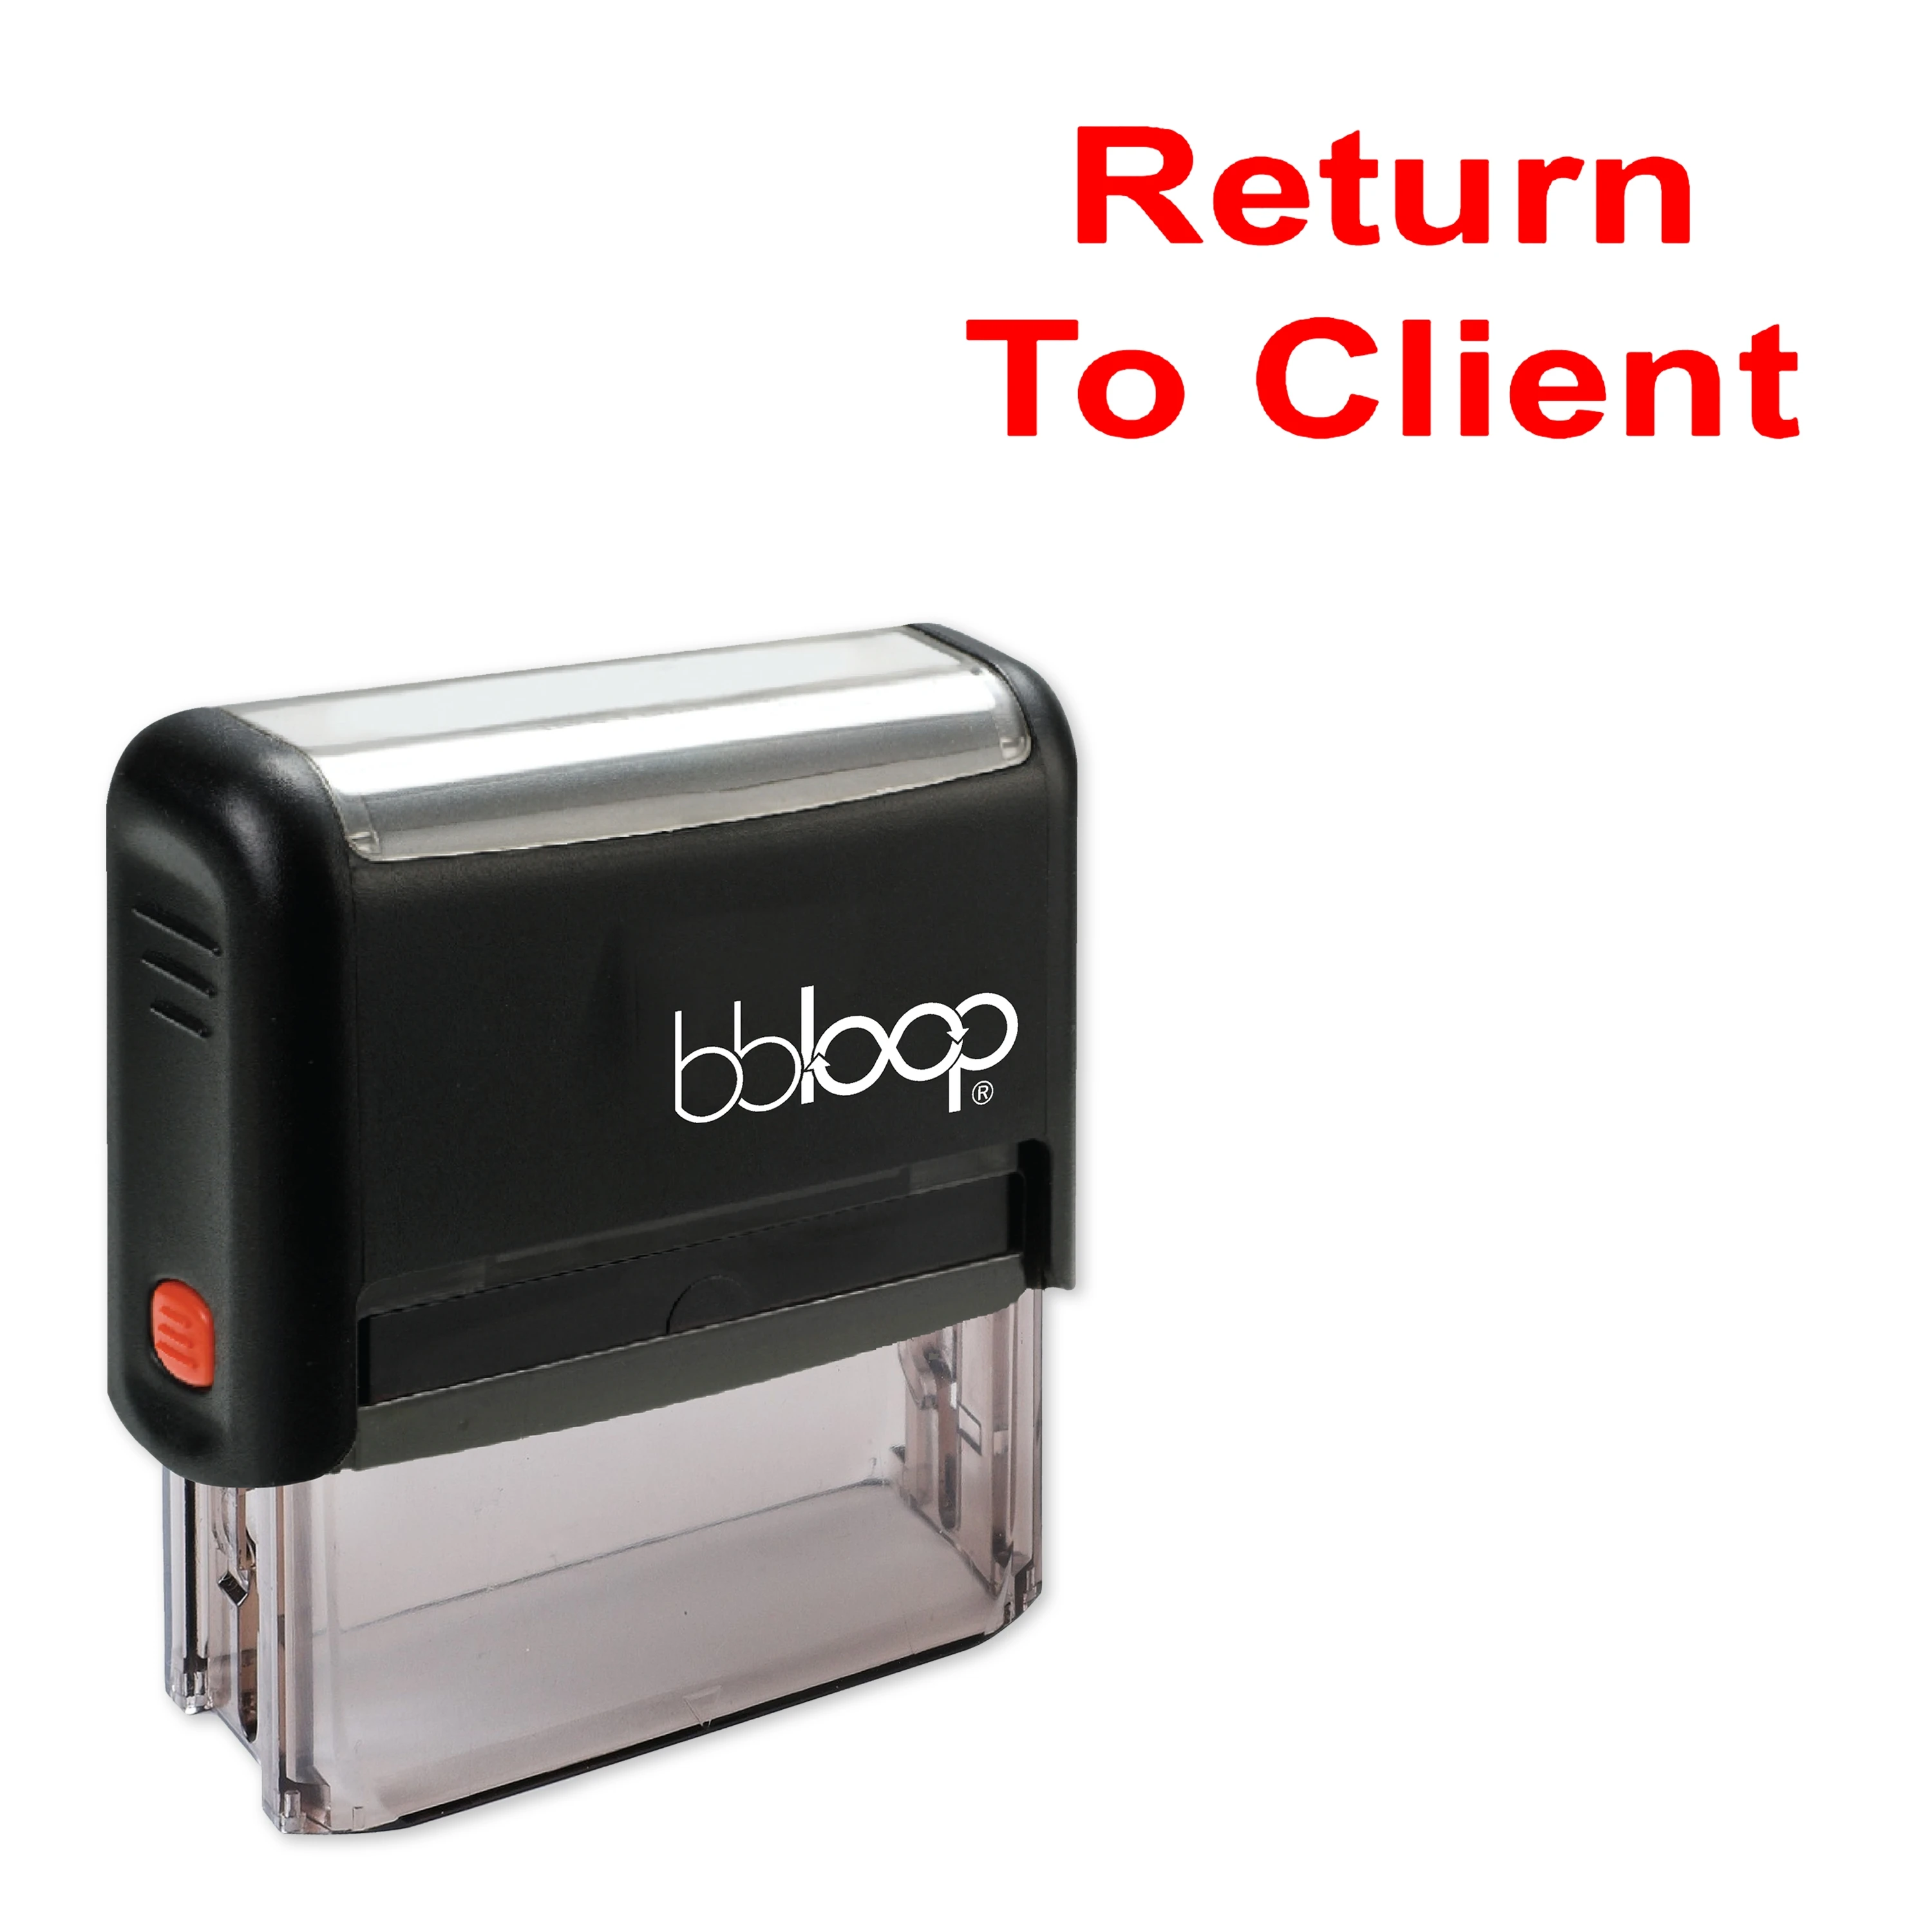 

Bbloop "Return To Client" Self-Inking Rubber Stamp